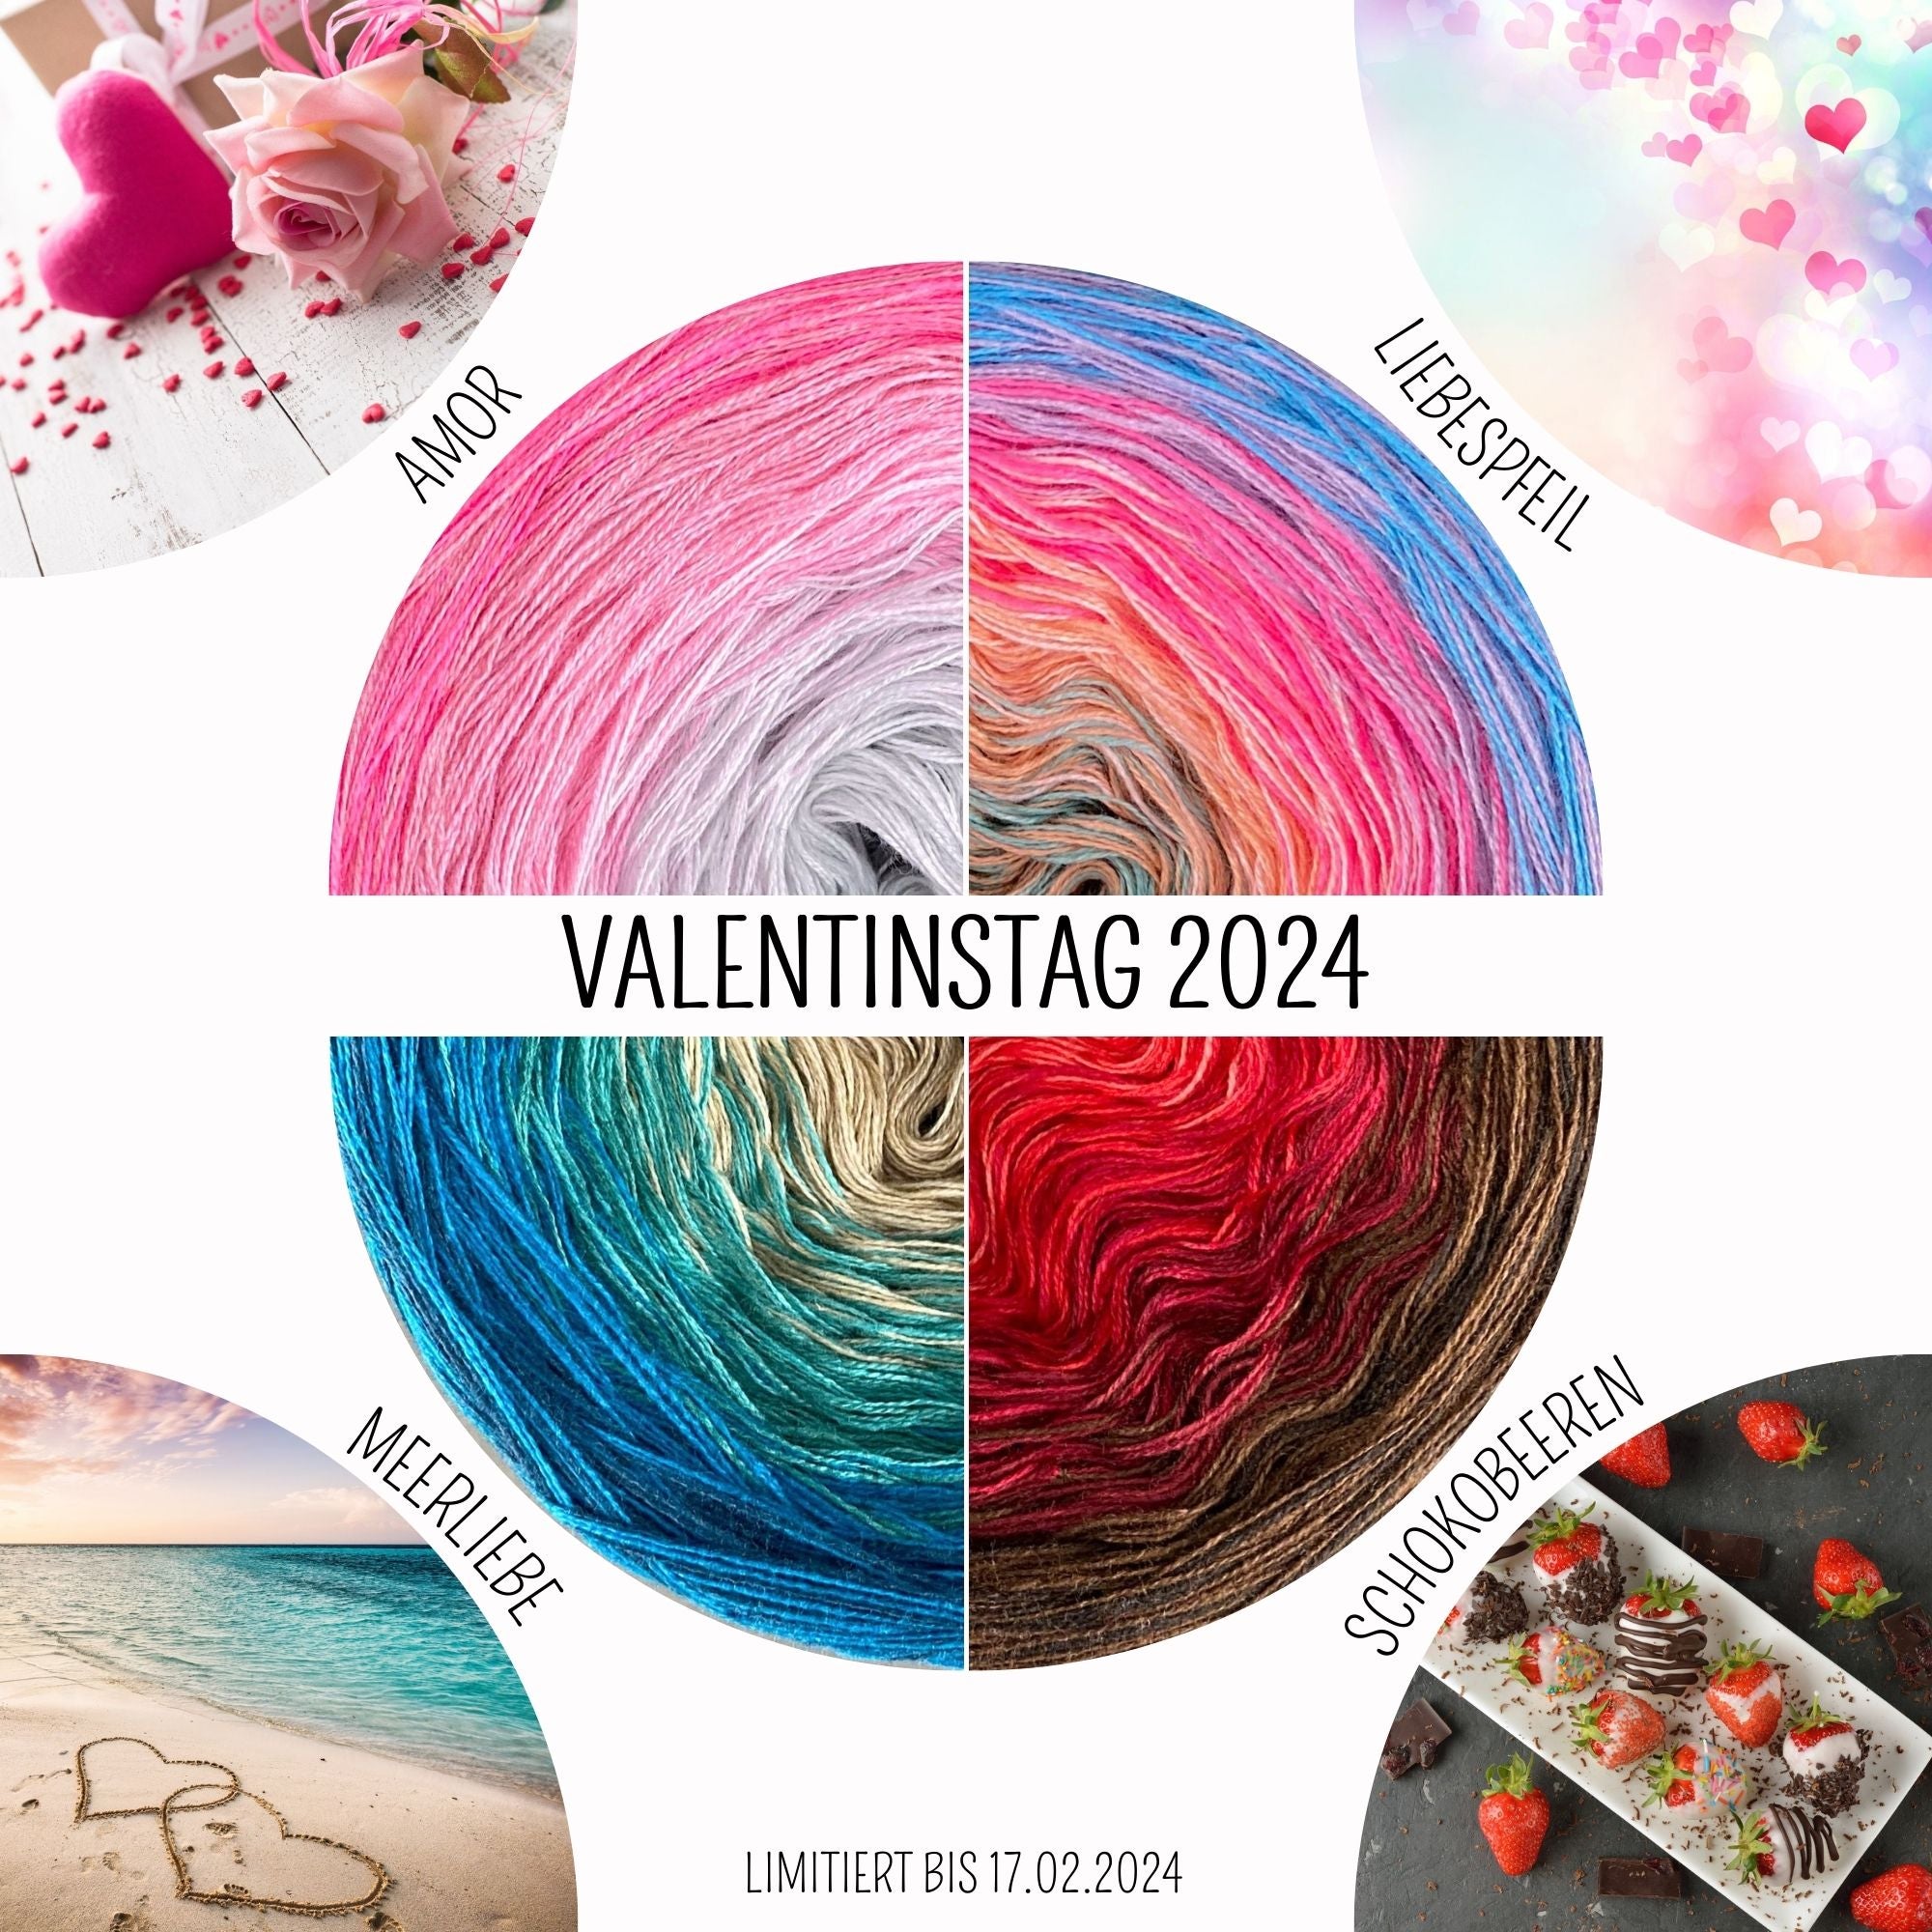 RELAUNCHED!! LIMITED EDITION - Valentine's Day Collection 2024